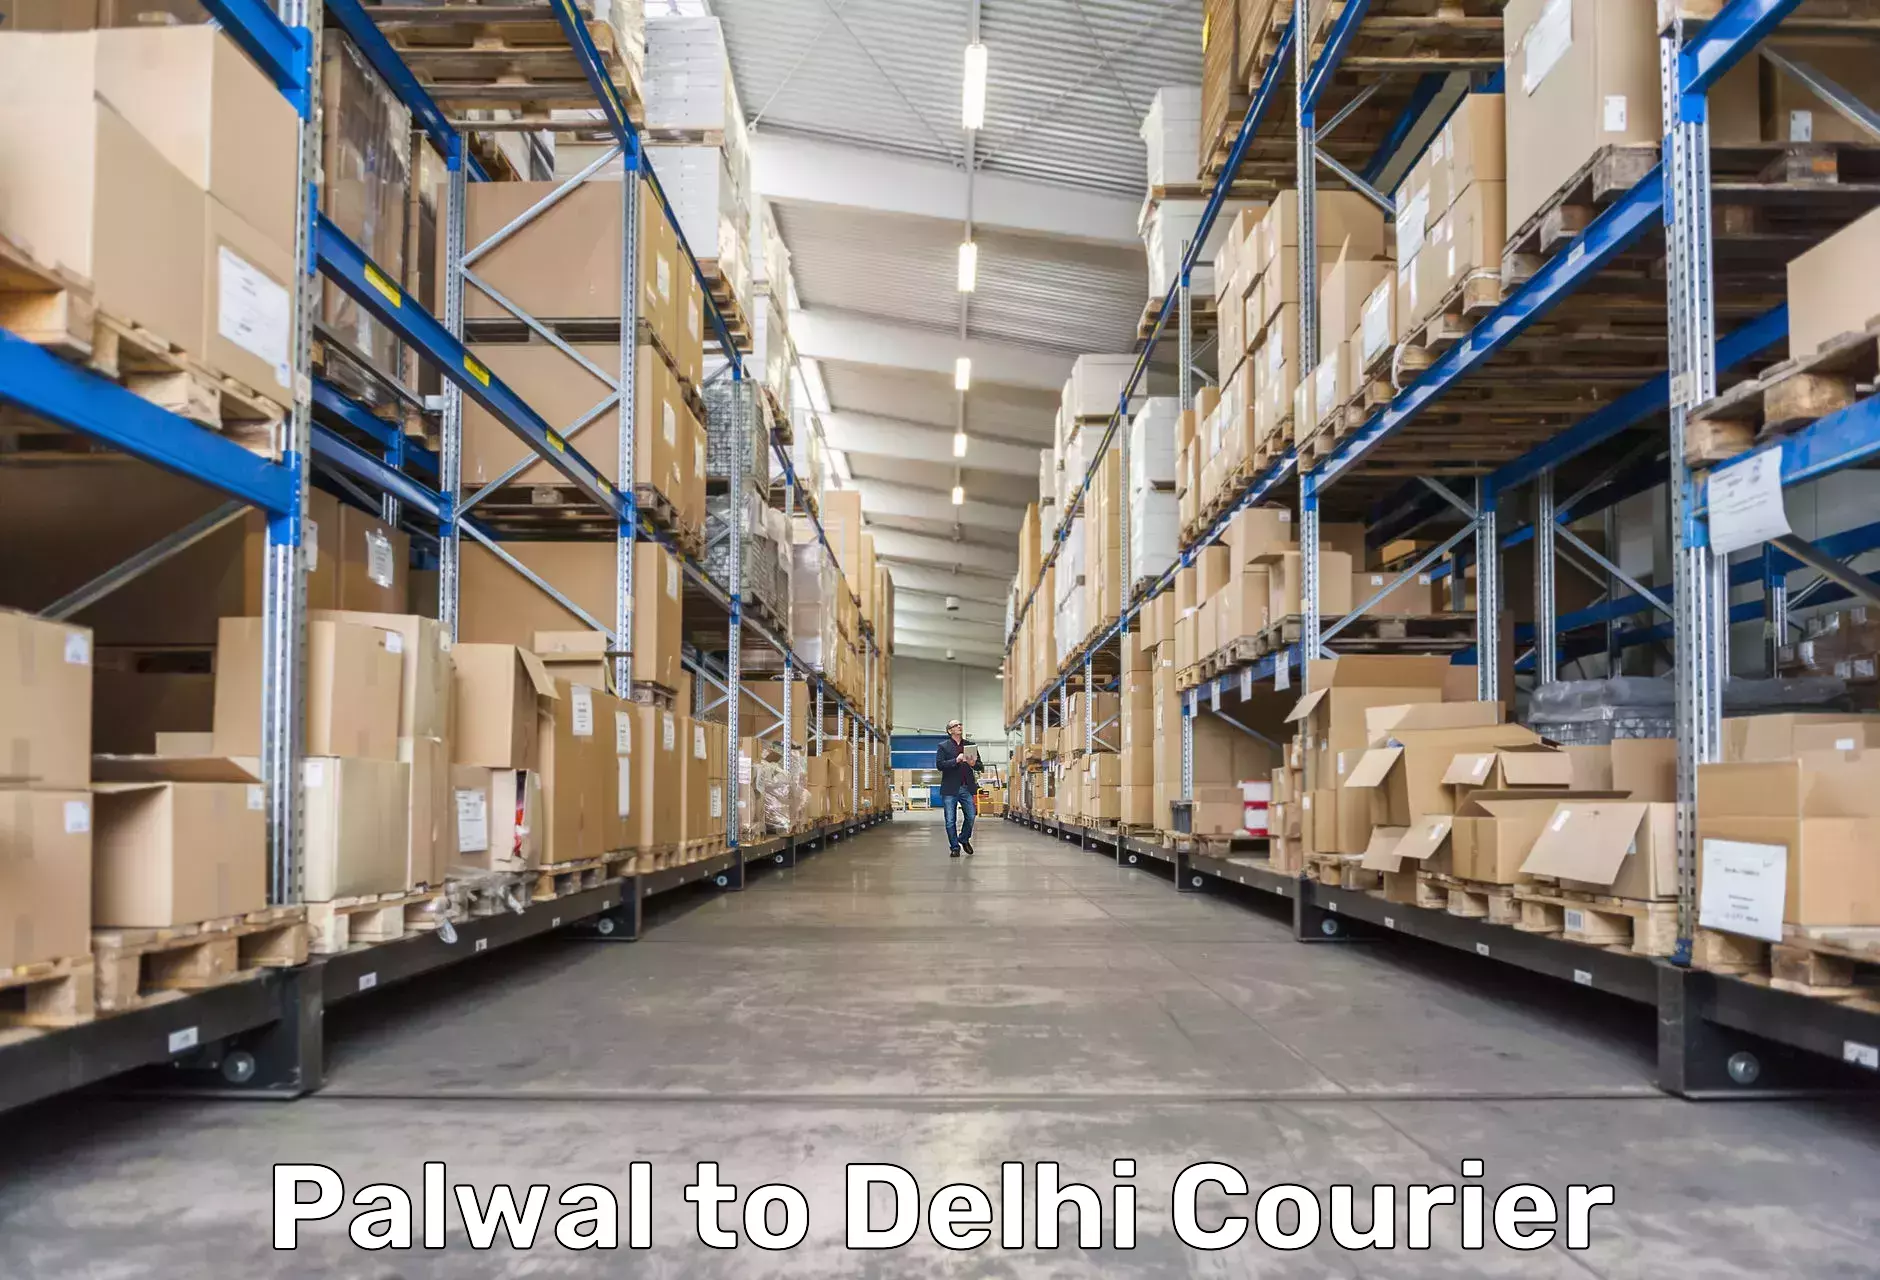 Courier service innovation Palwal to Delhi